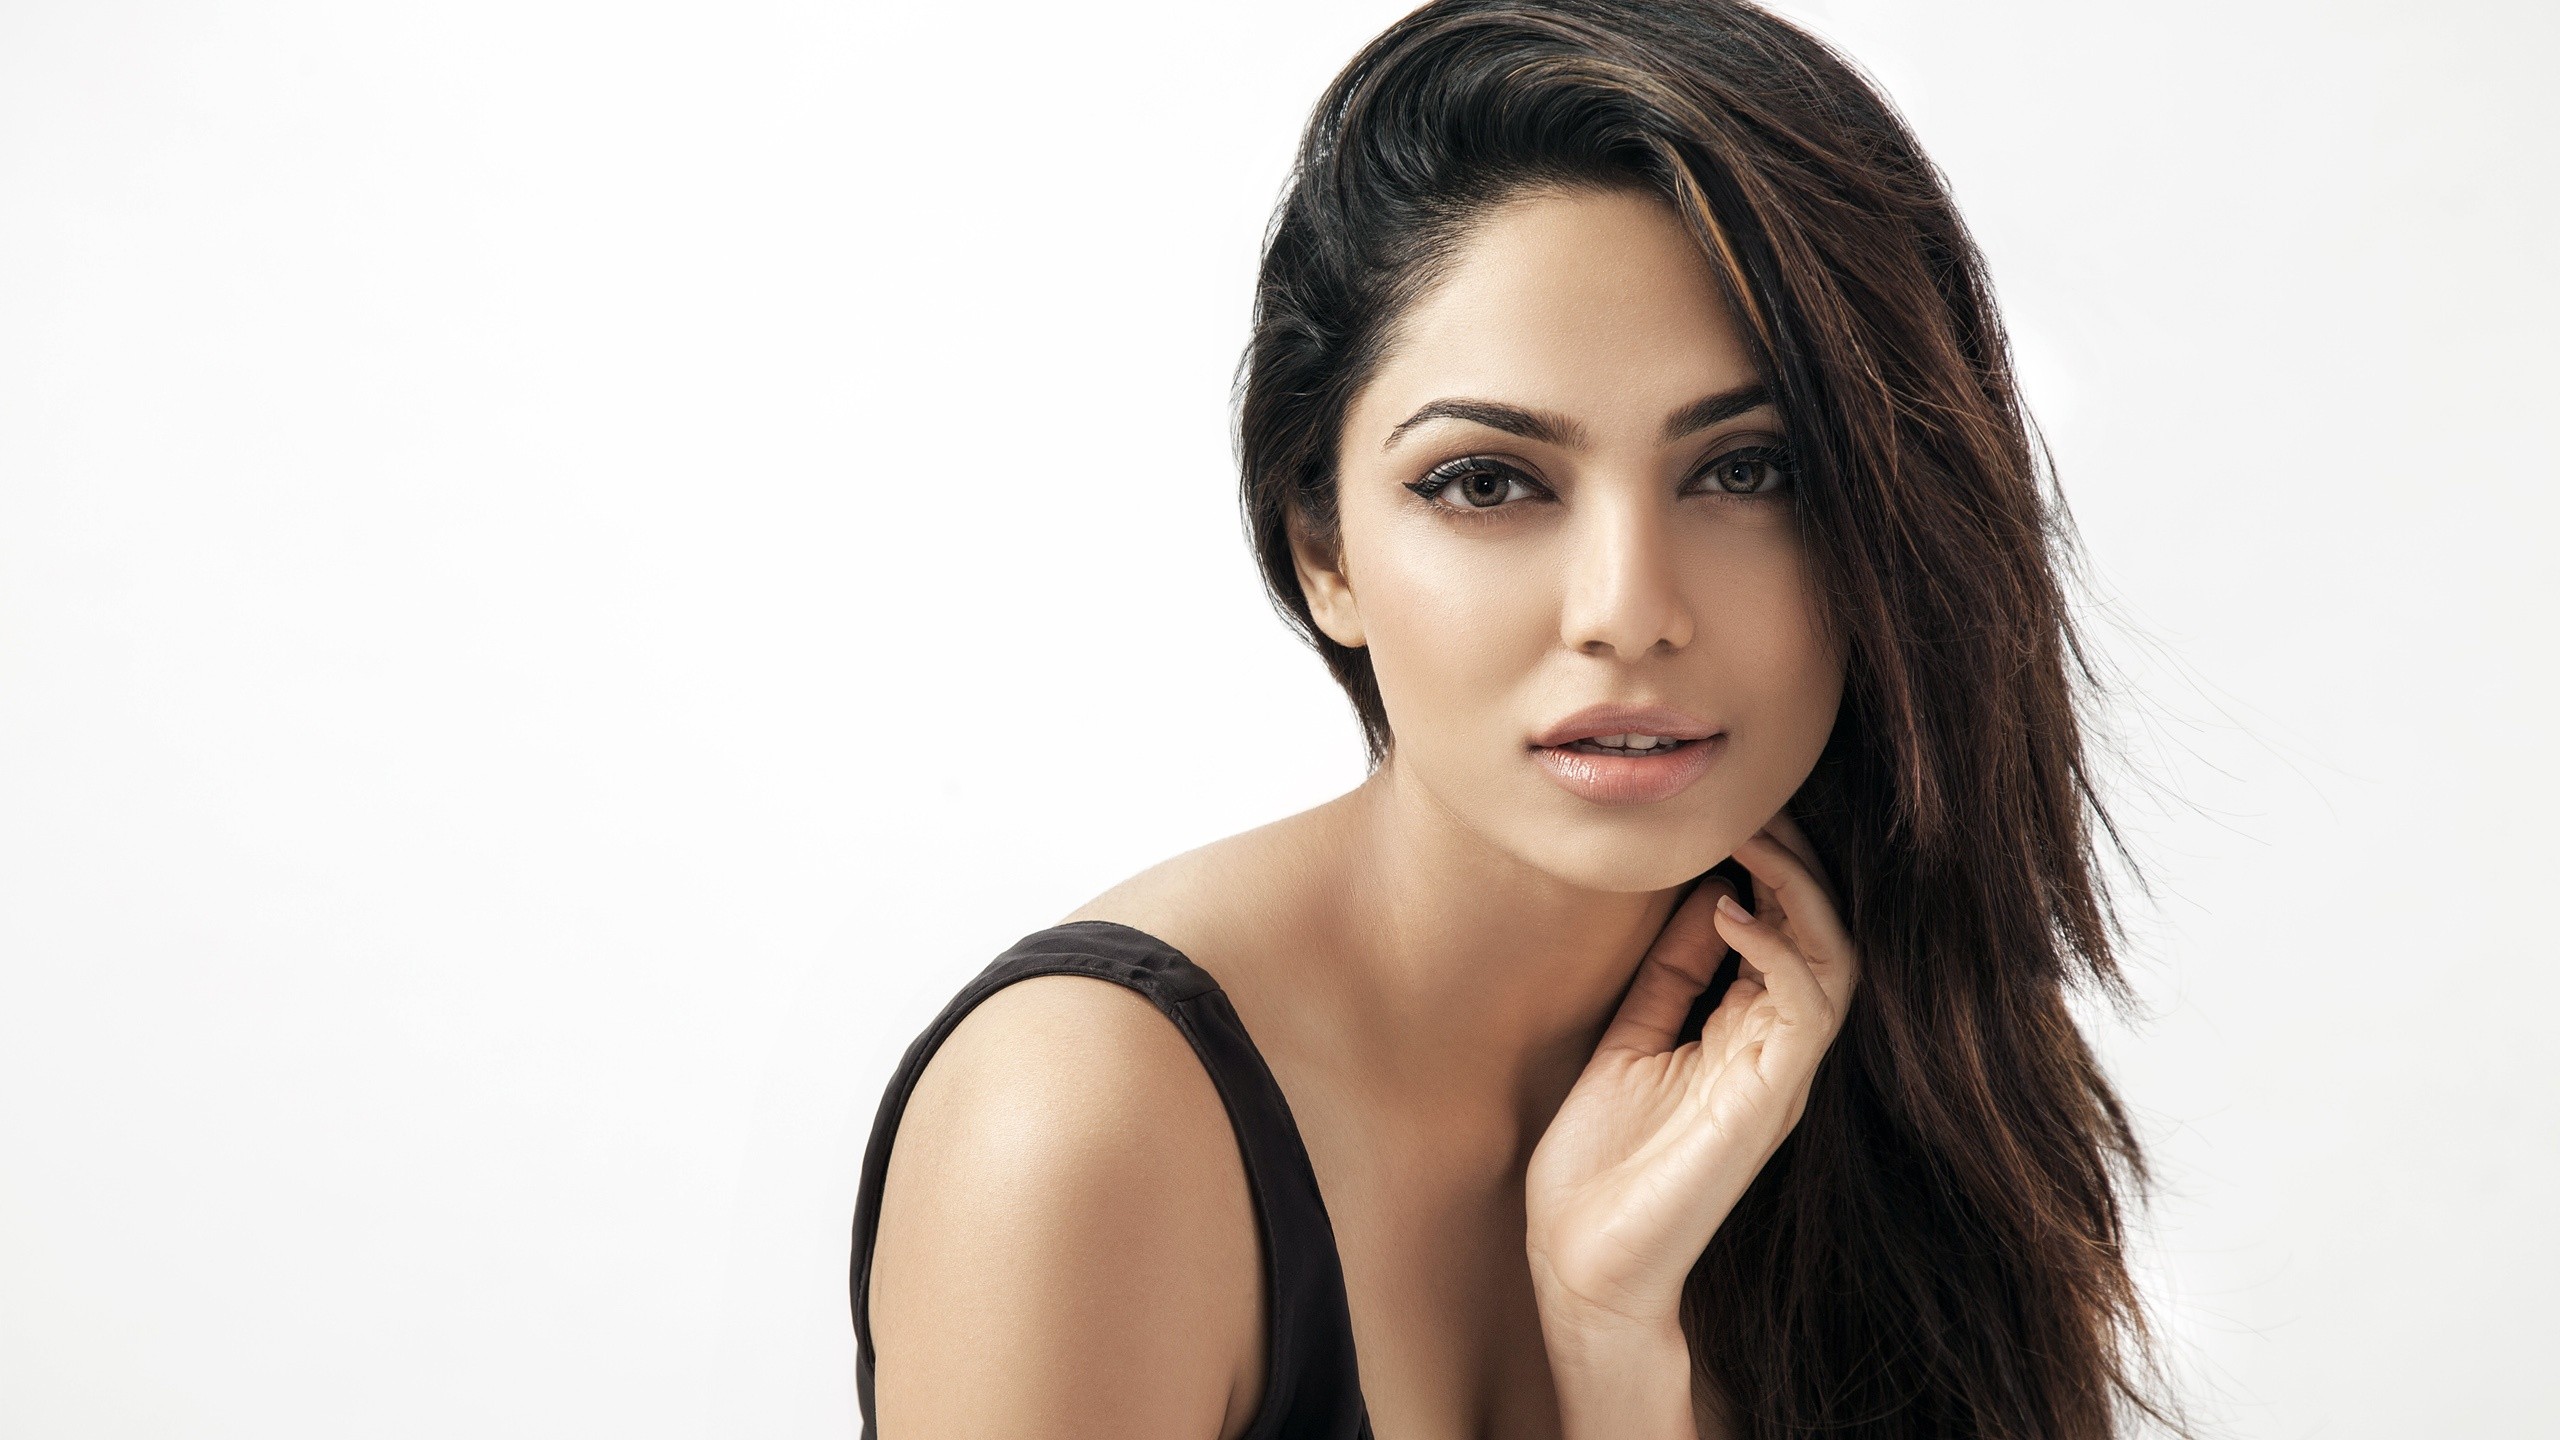 What Next For Sobhita Dhulipala The New Nation